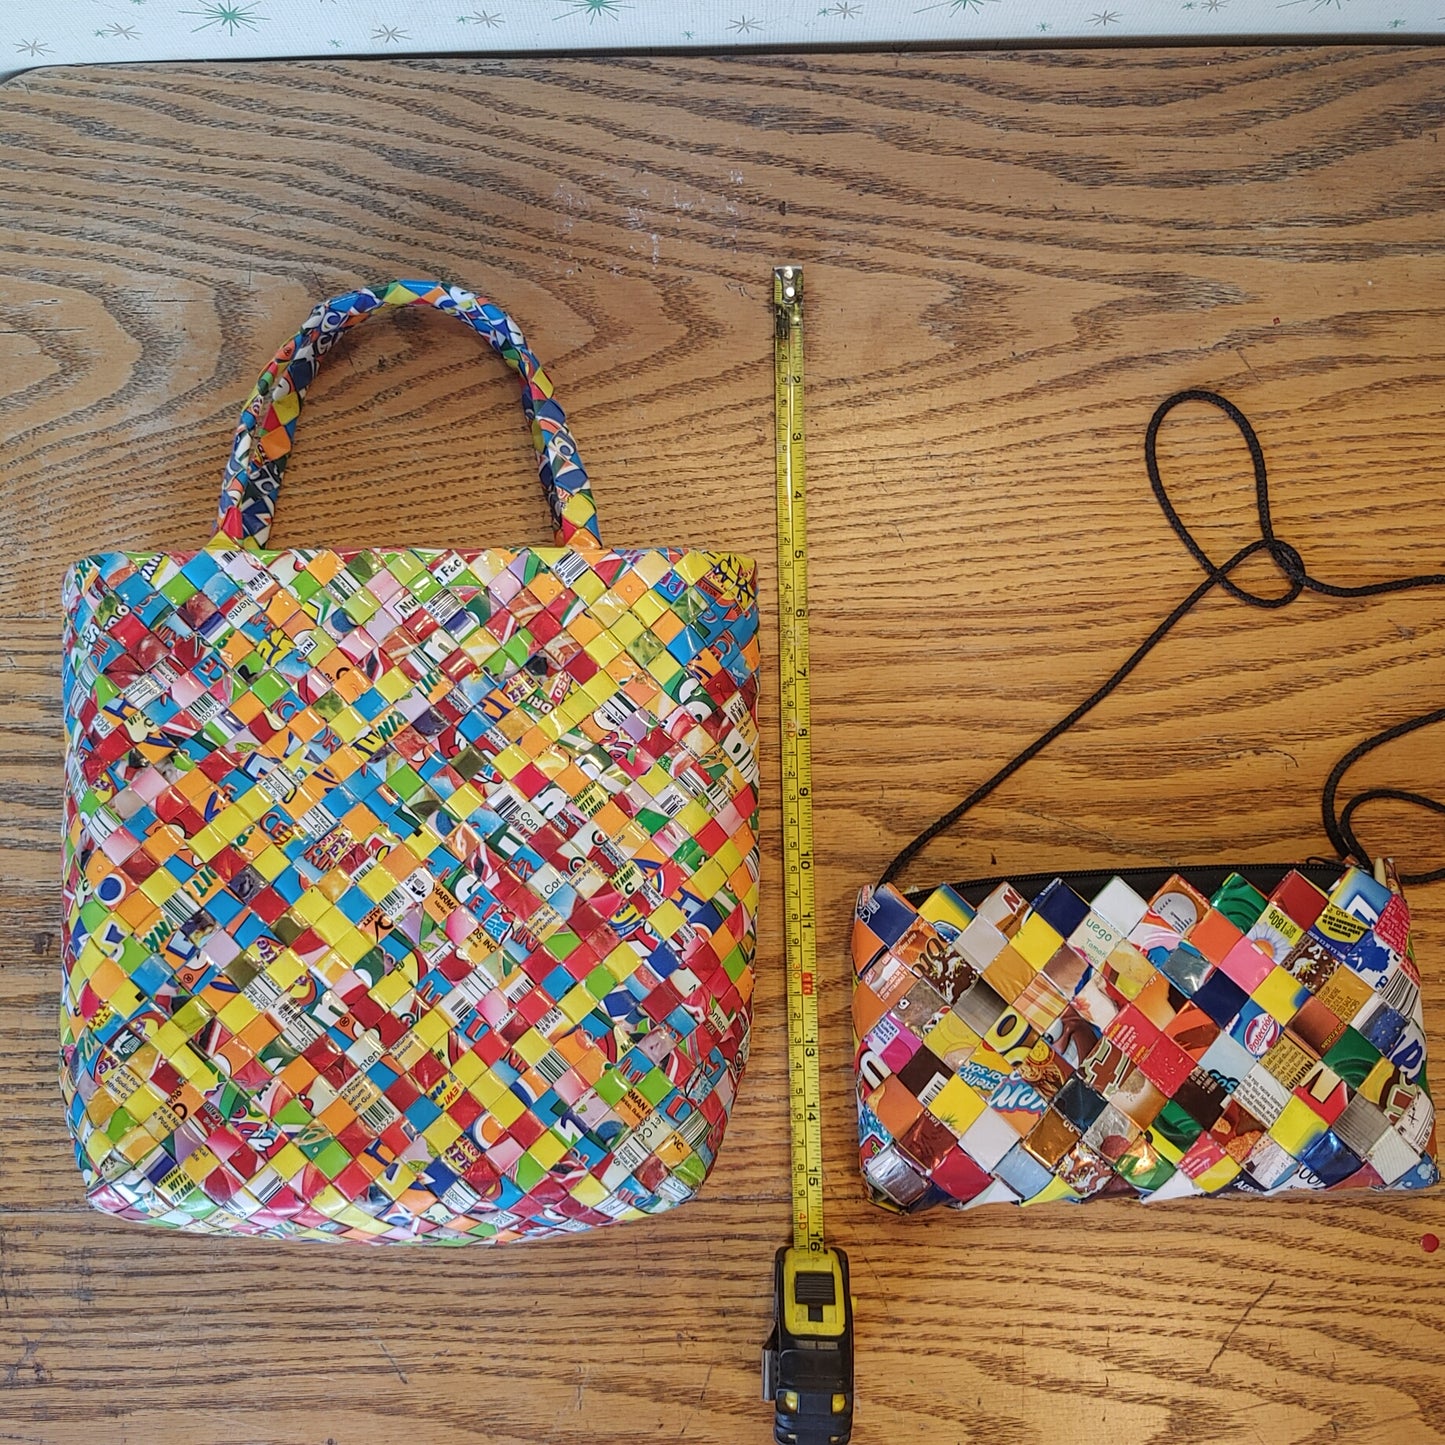 Wrapper It Up! Woven Recycled Candy Wrapper Purse Bag Clutch Tote Pair Large Artisanal Mexico